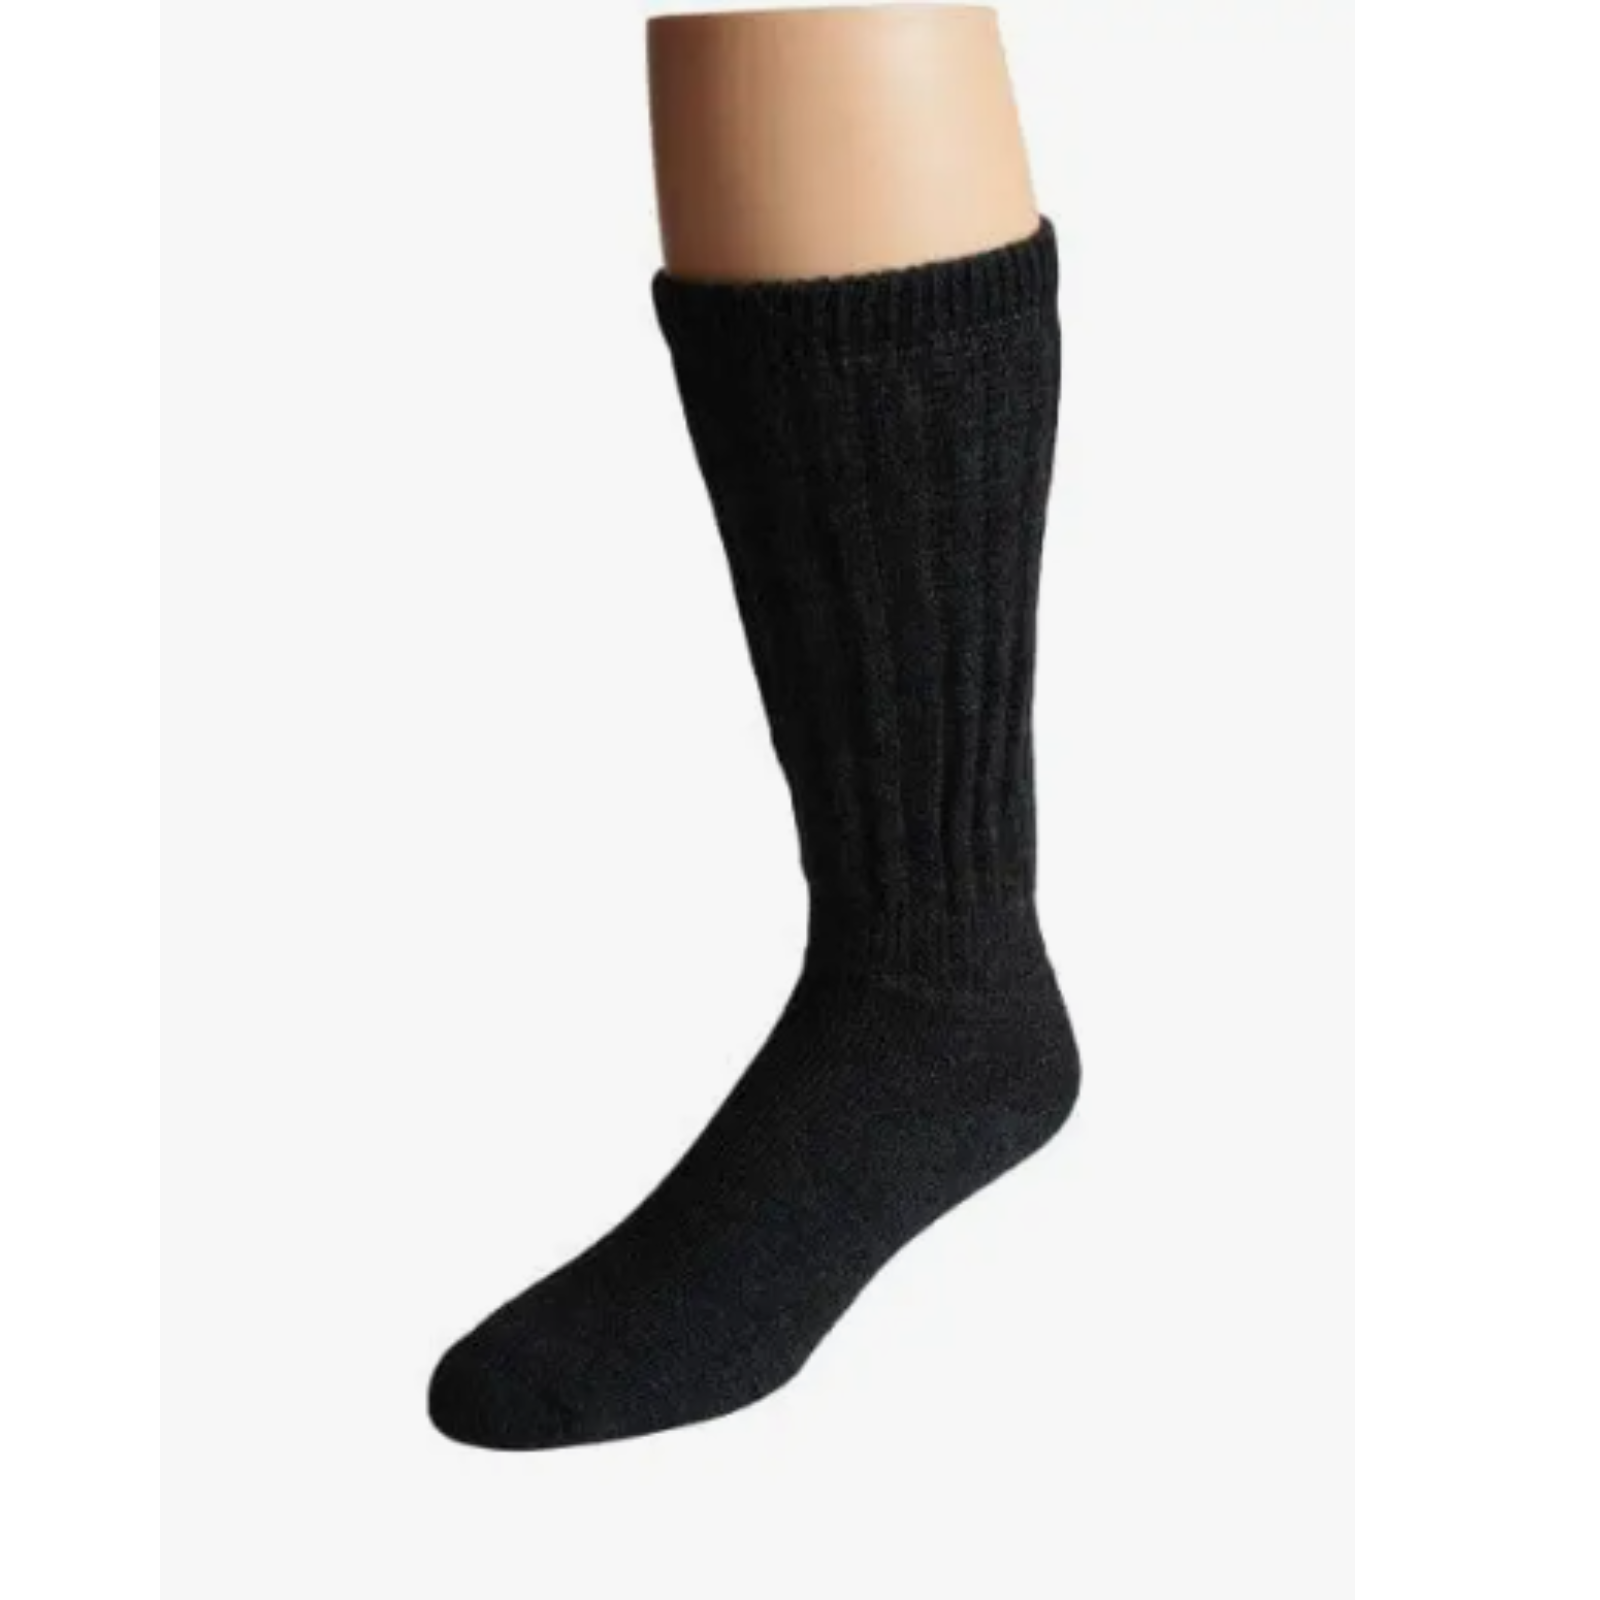 Choice Alpaca Products Diabetic/Therapeutic women's and men's crew sock in charcoal on display foot with sock pulled up